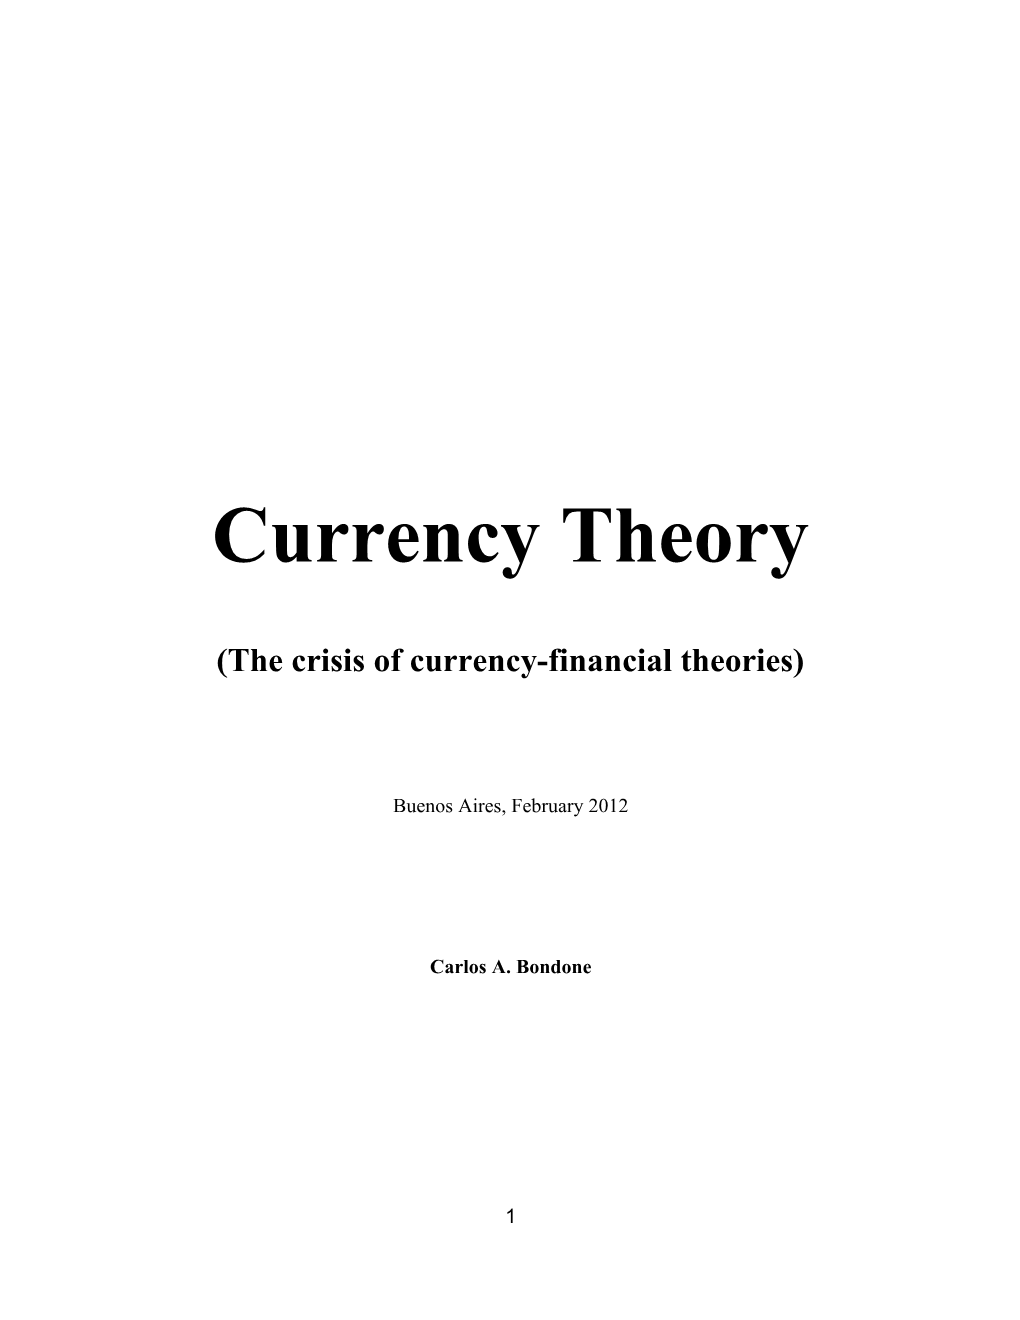 The Crisis of Currency-Financial Theories